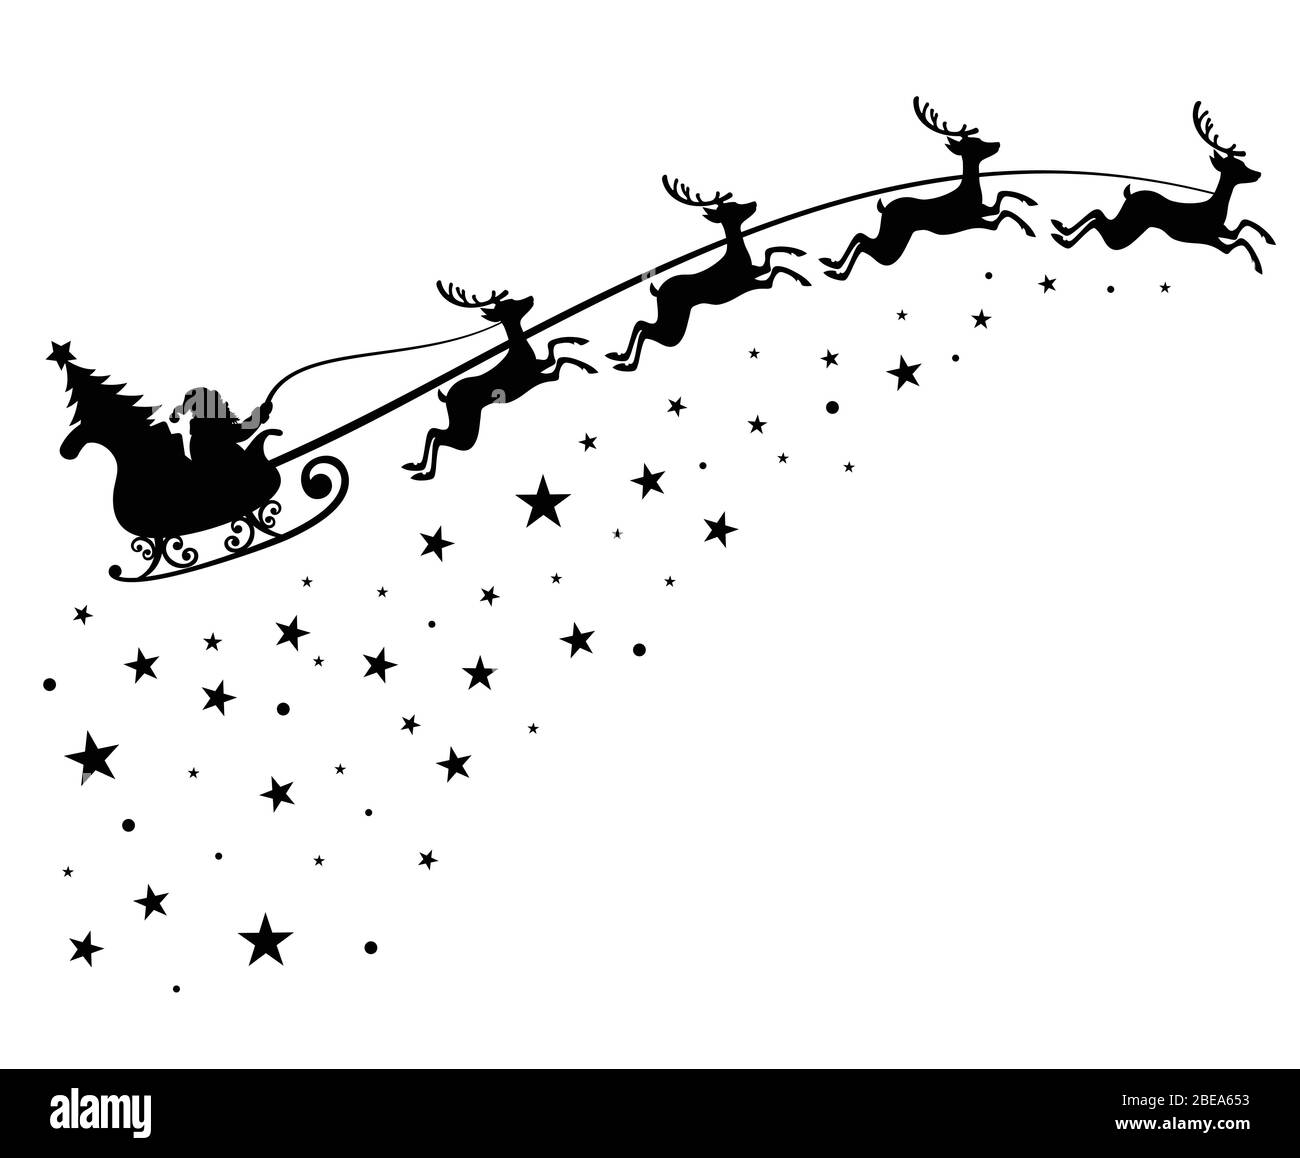 Santa Claus on sleigh flying sky with deers black vector silhouette for winter holiday decoration and Christmas greeting card. Monochrome santa claus with christmas tree in night sky illustration Stock Vector